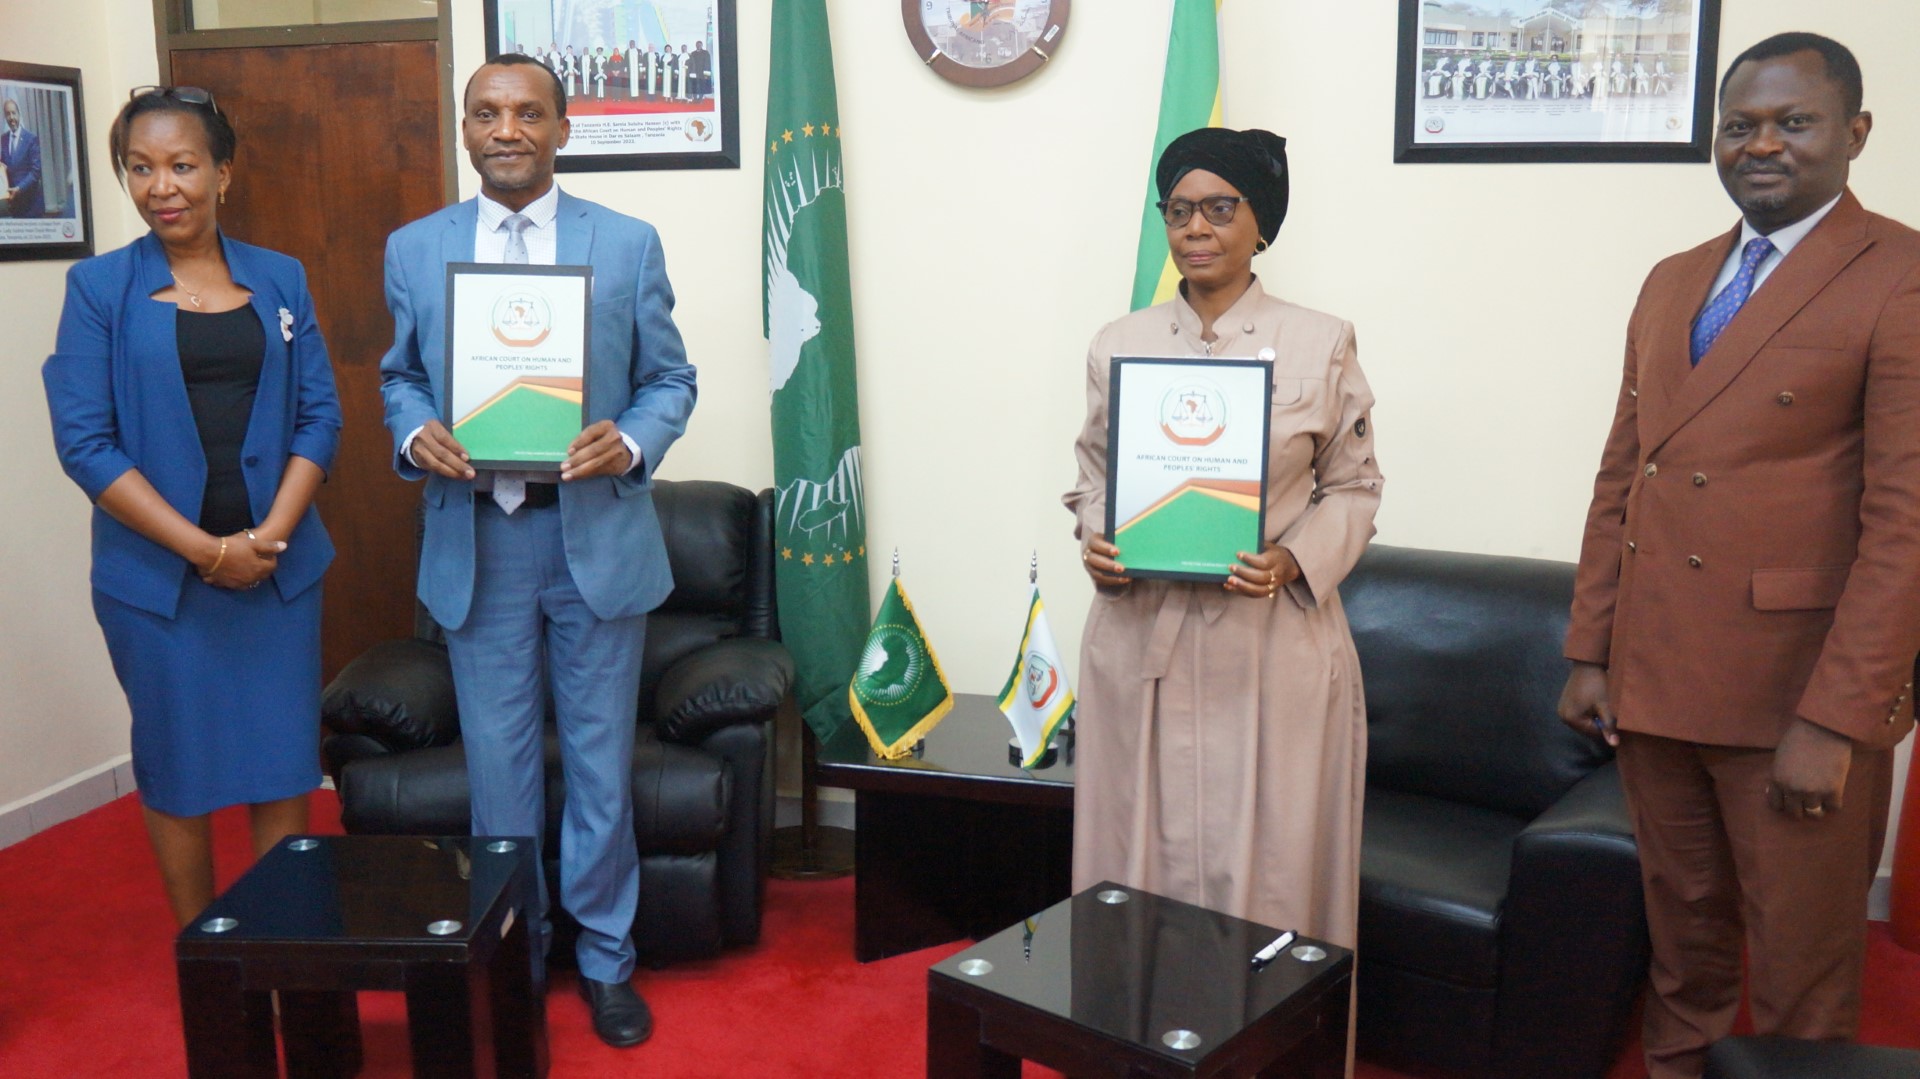 THE AFRICAN COURT AND THE TANZANIA LAW SCHOOL SIGN MoU OF COOPERATION